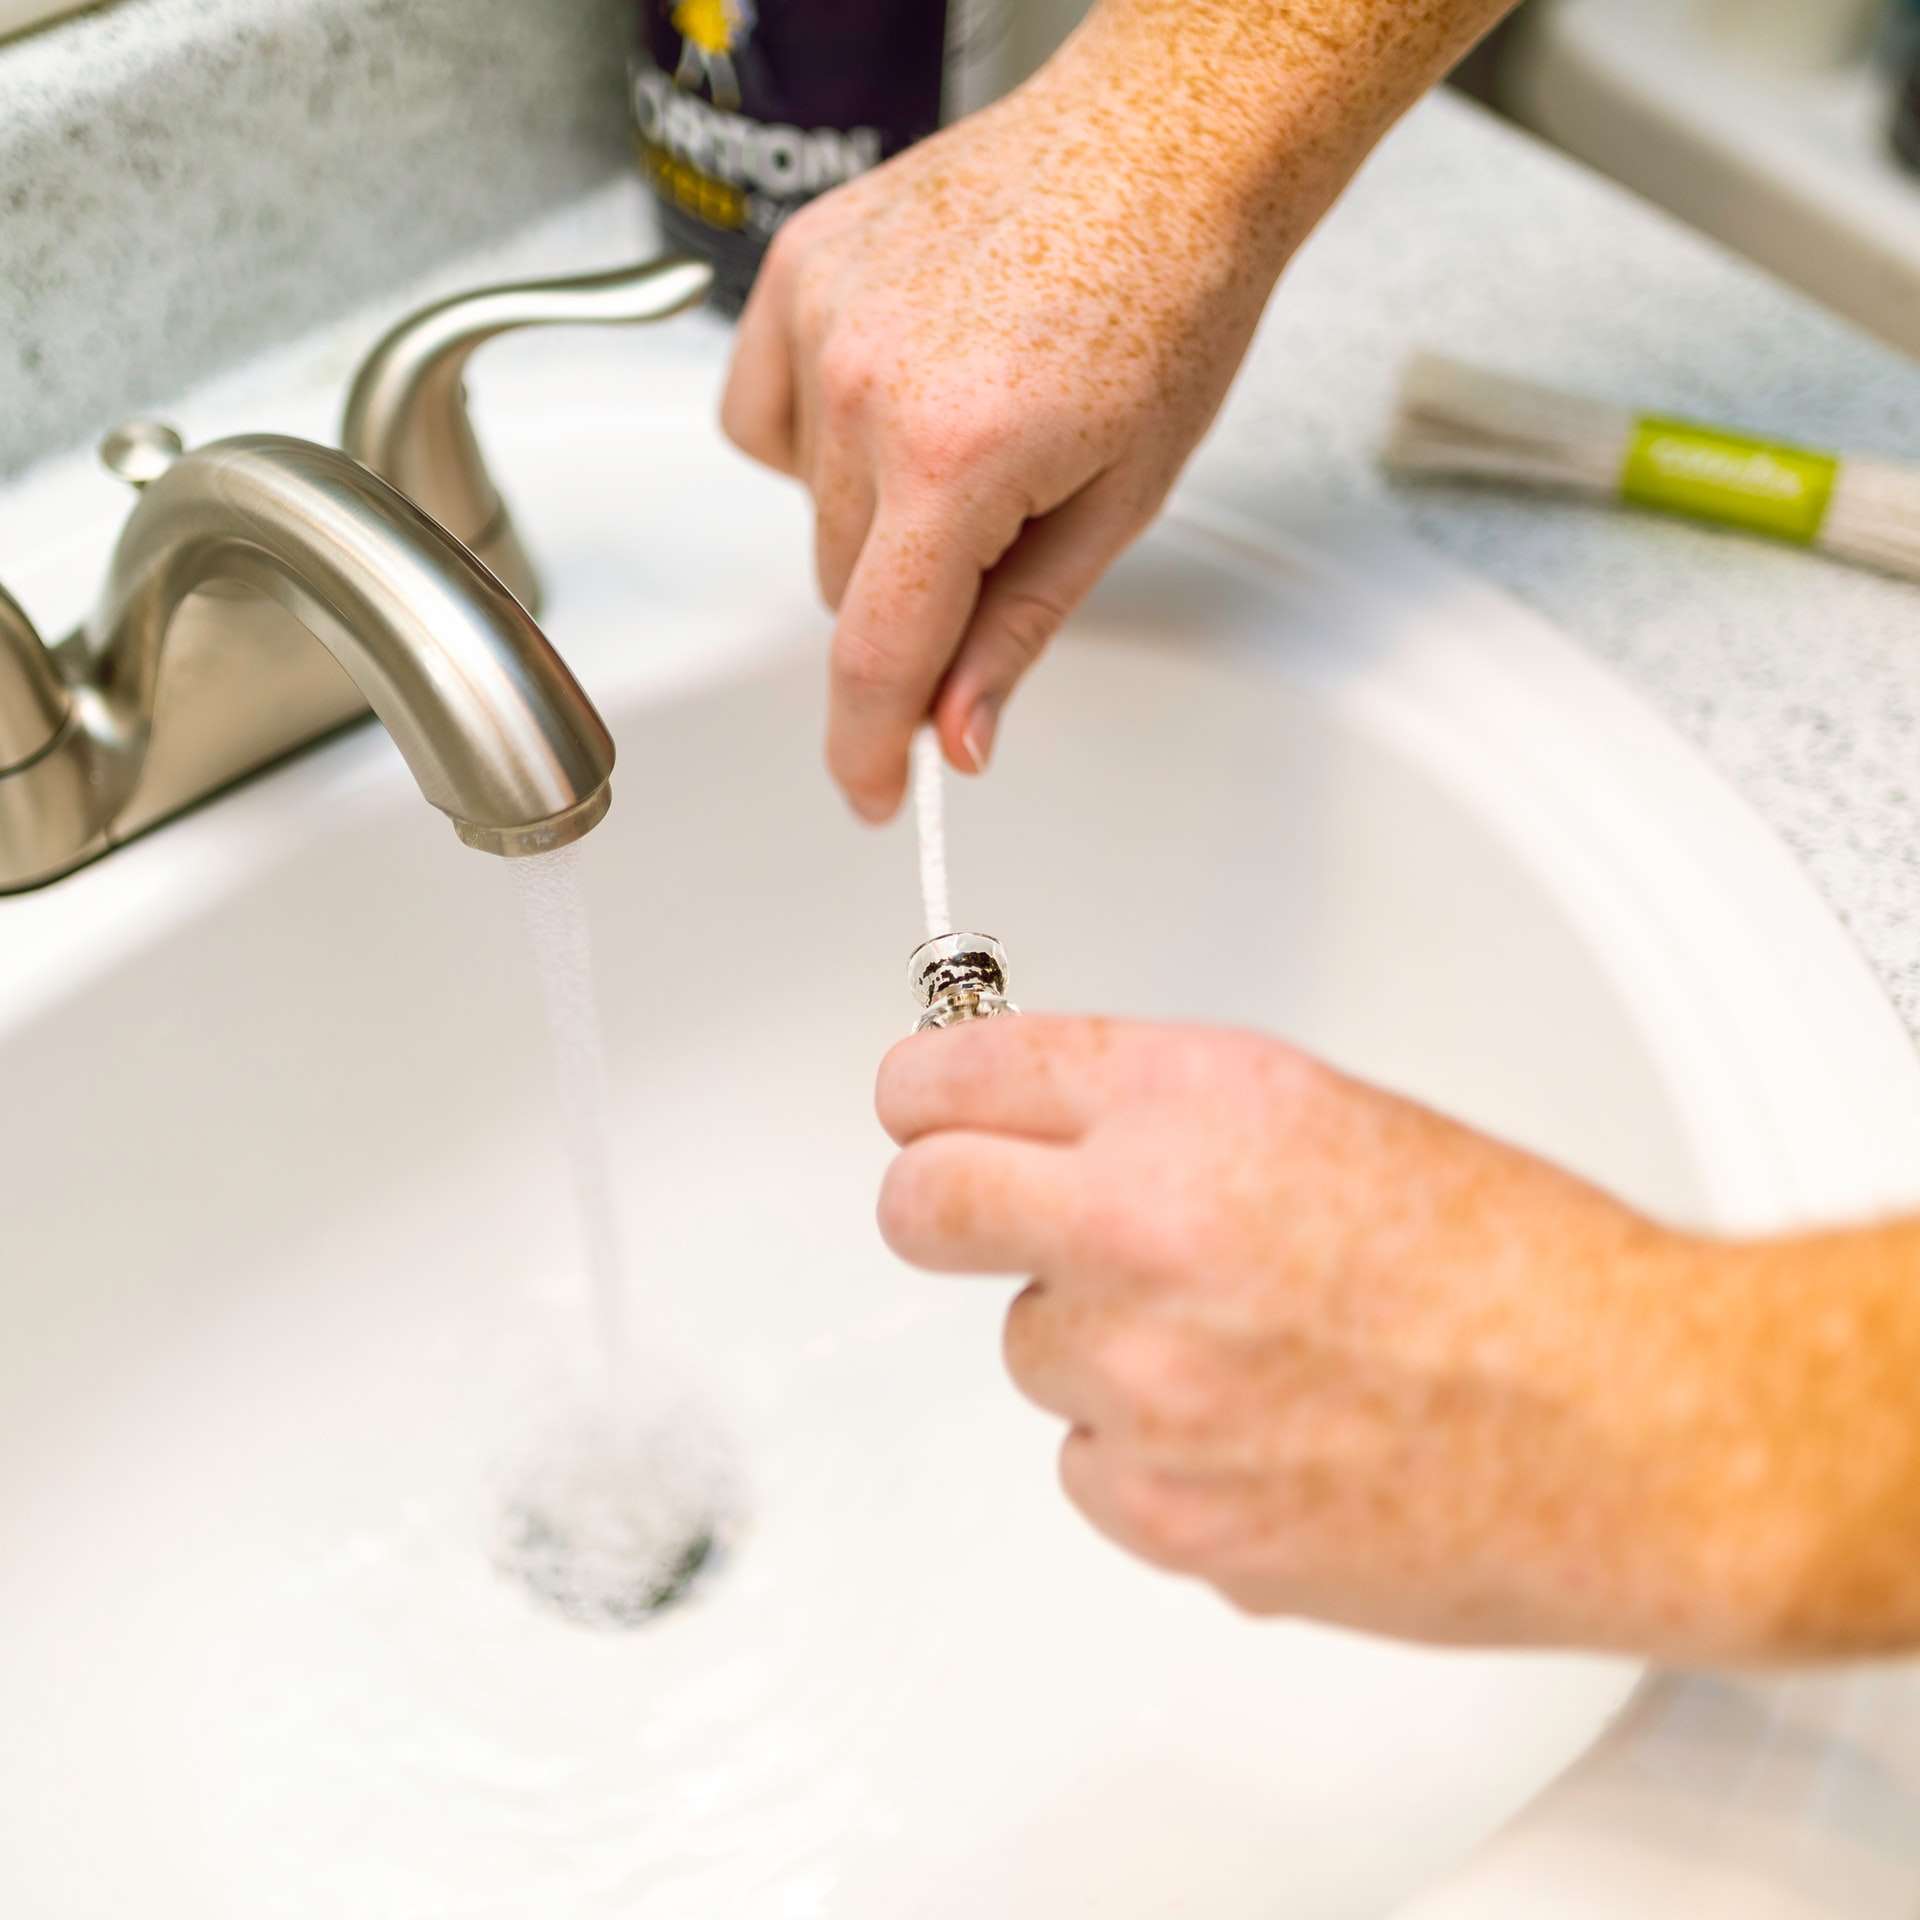 5 Plumbing Problems Commonly Found in Old Houses